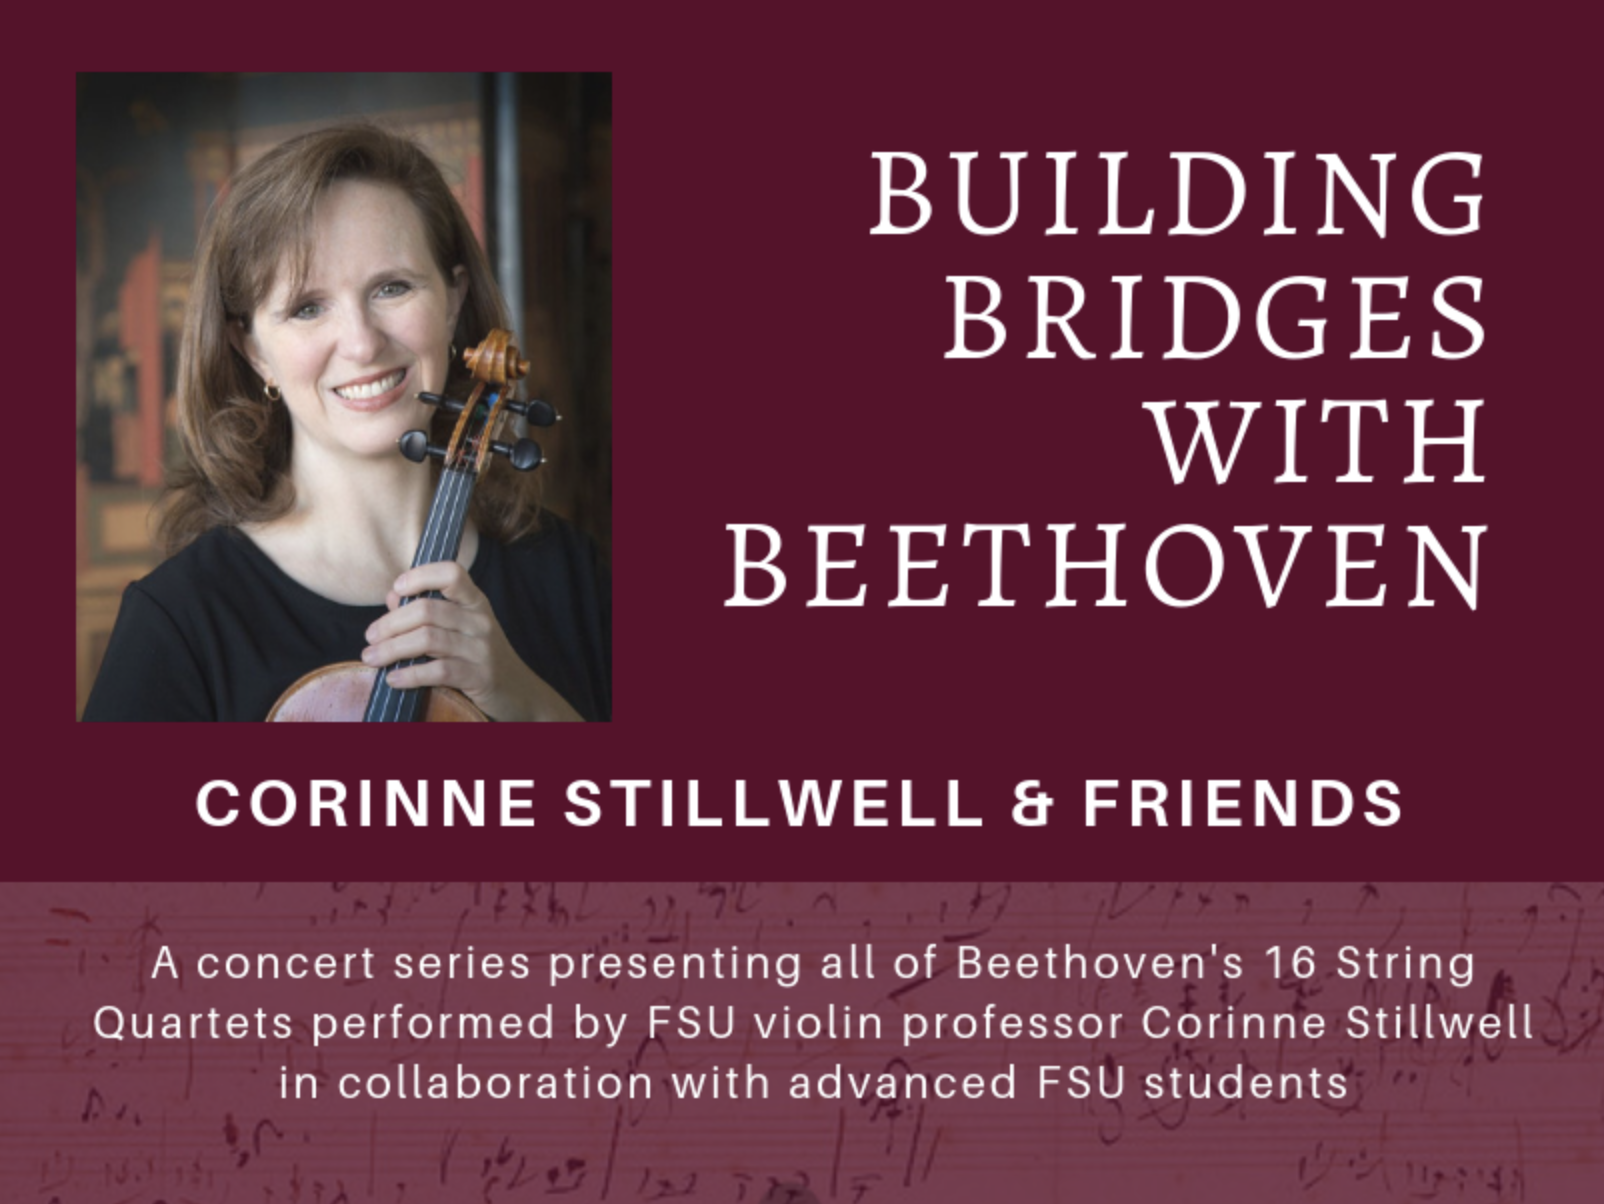 Building Bridges with Beethoven: Corinne Stillwell and Friends